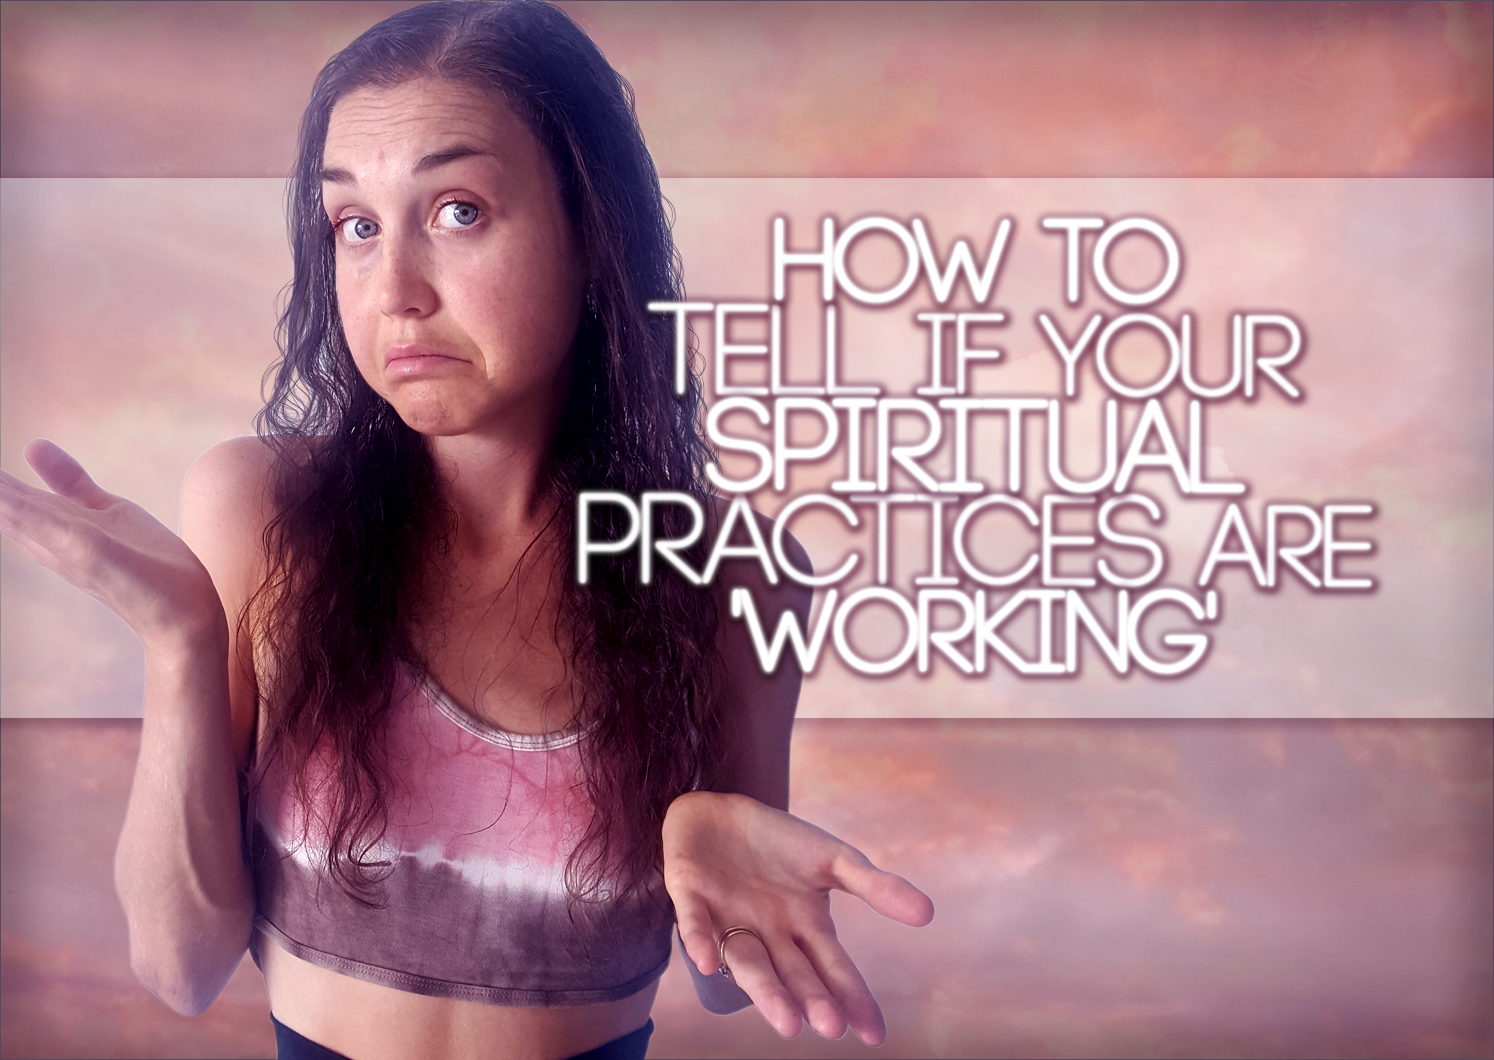 How To Tell If Your Spiritual/Self Love/Personal Growth Practices Are Working: